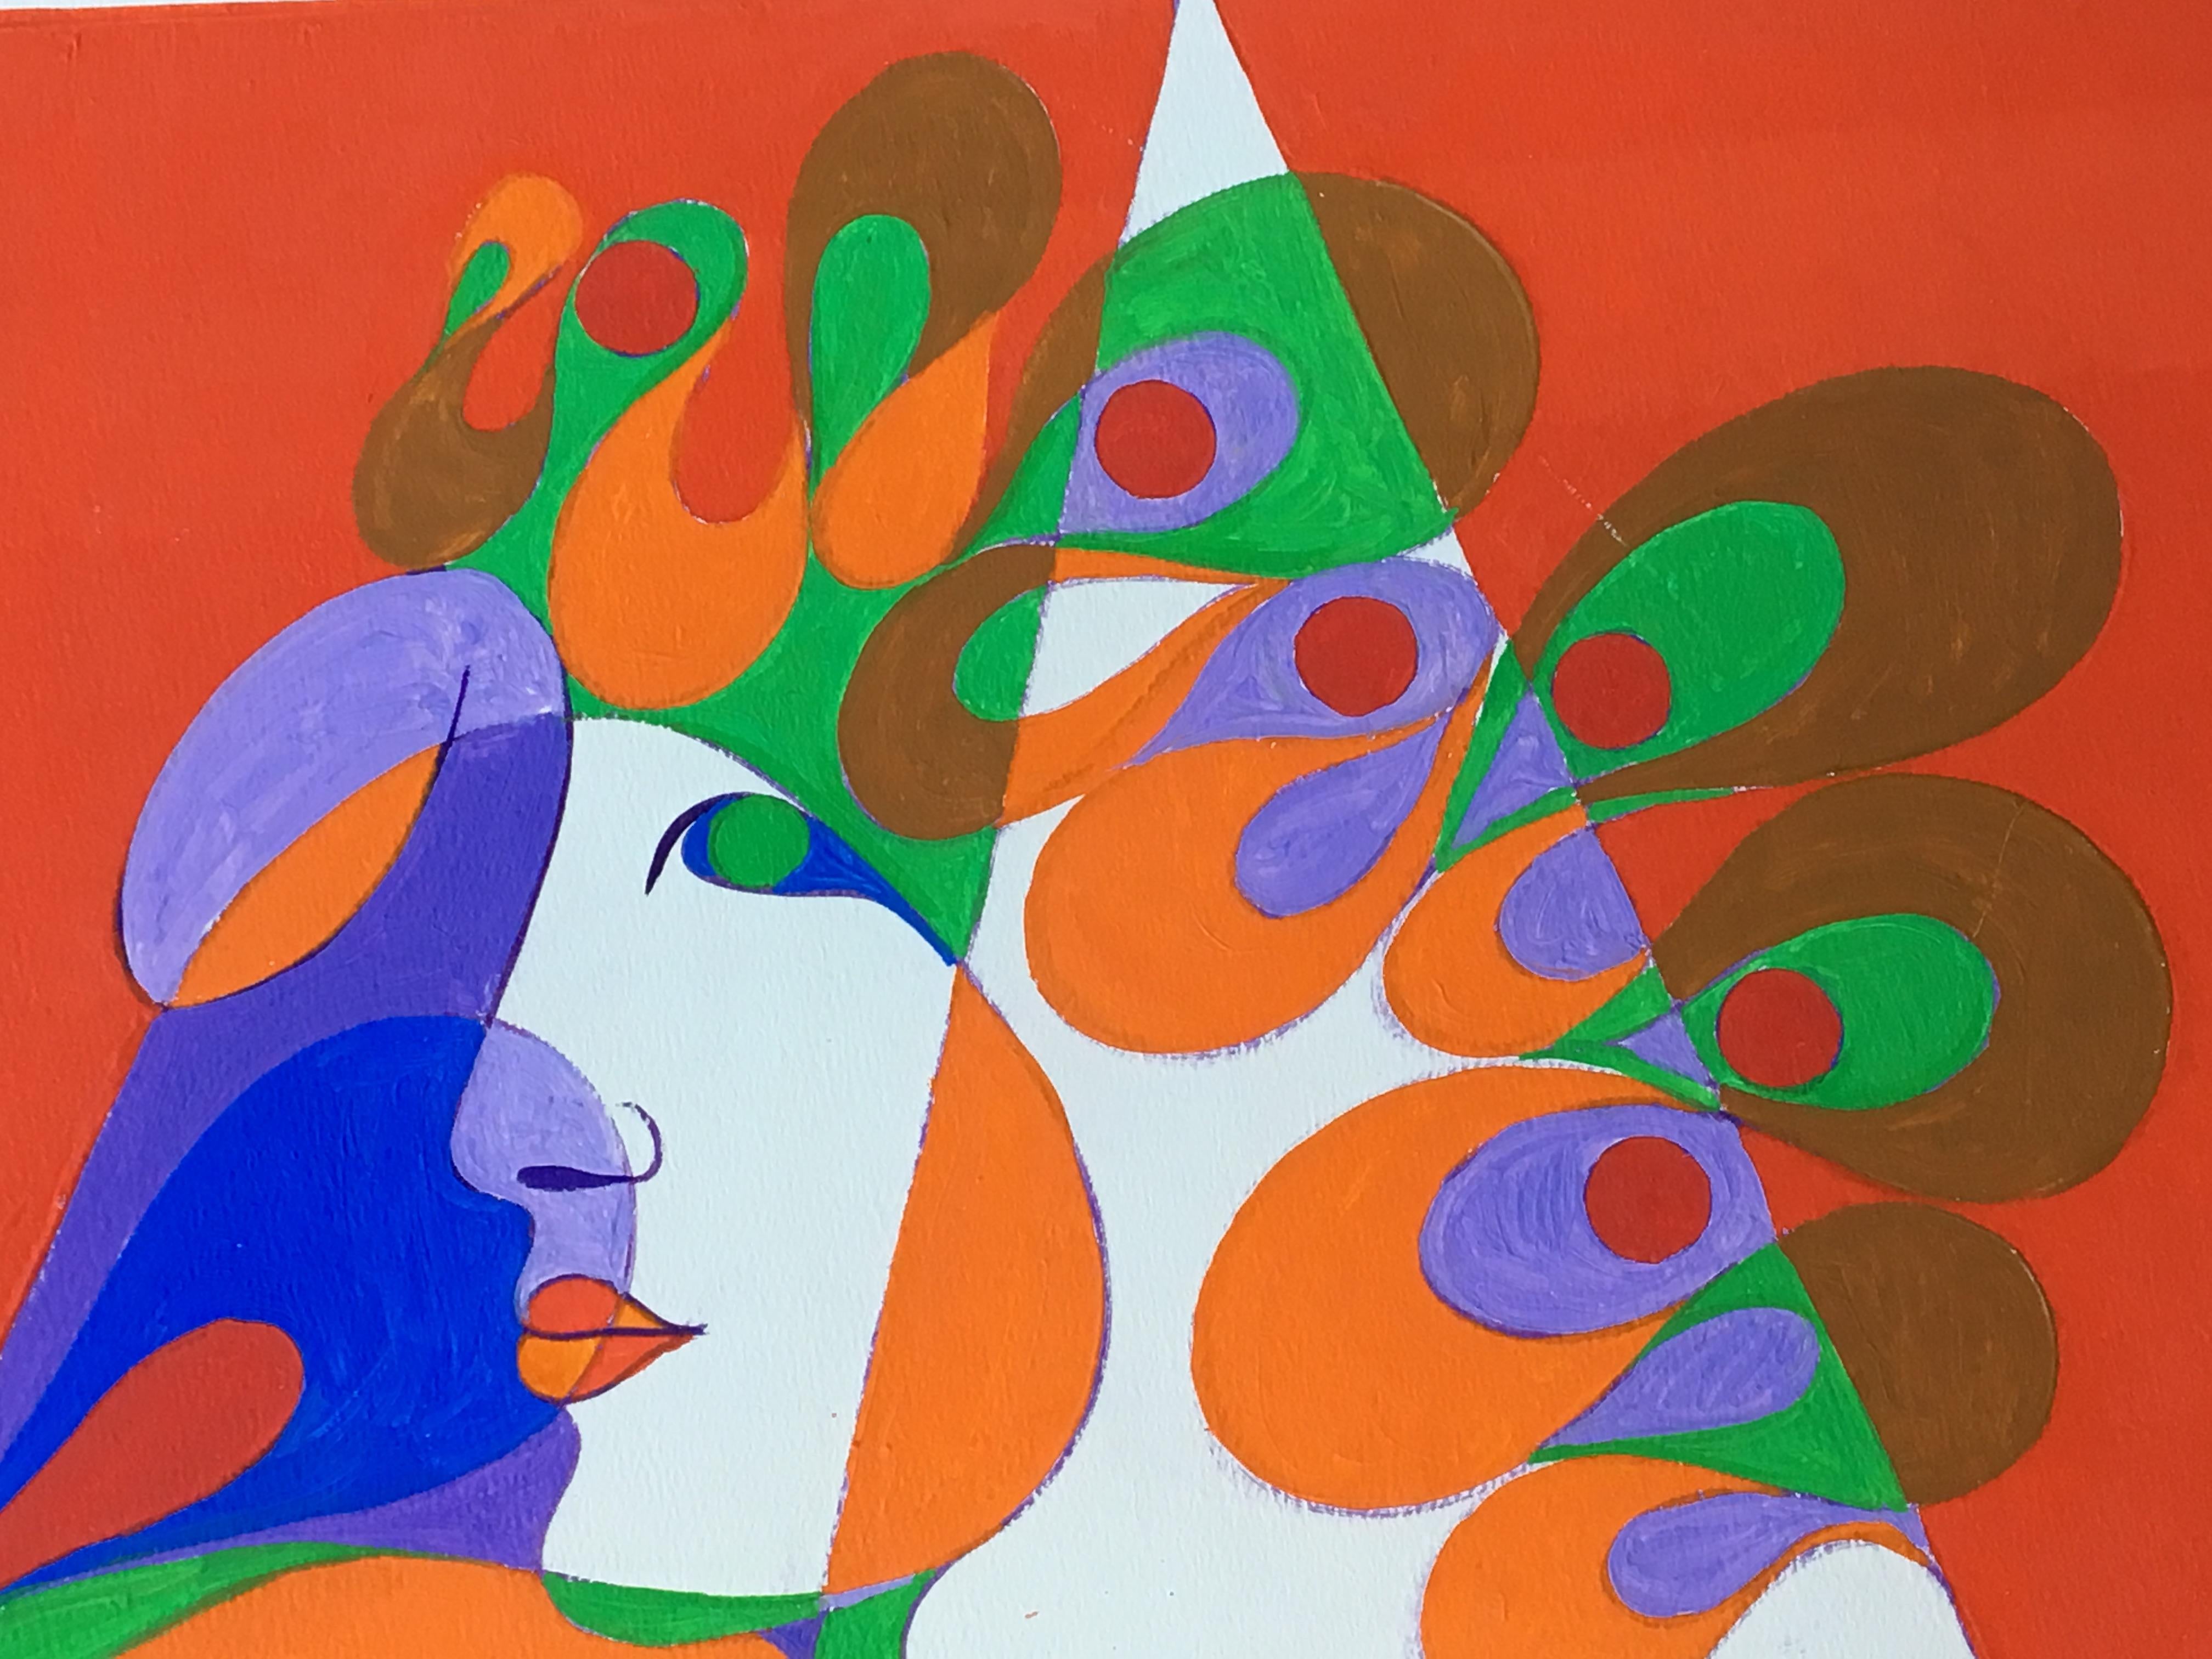 A vibrante, psychedelic abstract painting of a woman's side profile. Signed Radoczy, 1969.

Albert Radoczy was a painter from the NY Tristate area, most notably in the 1960s and 1970s. Radoczy was a master at exploring the female form. Throughout